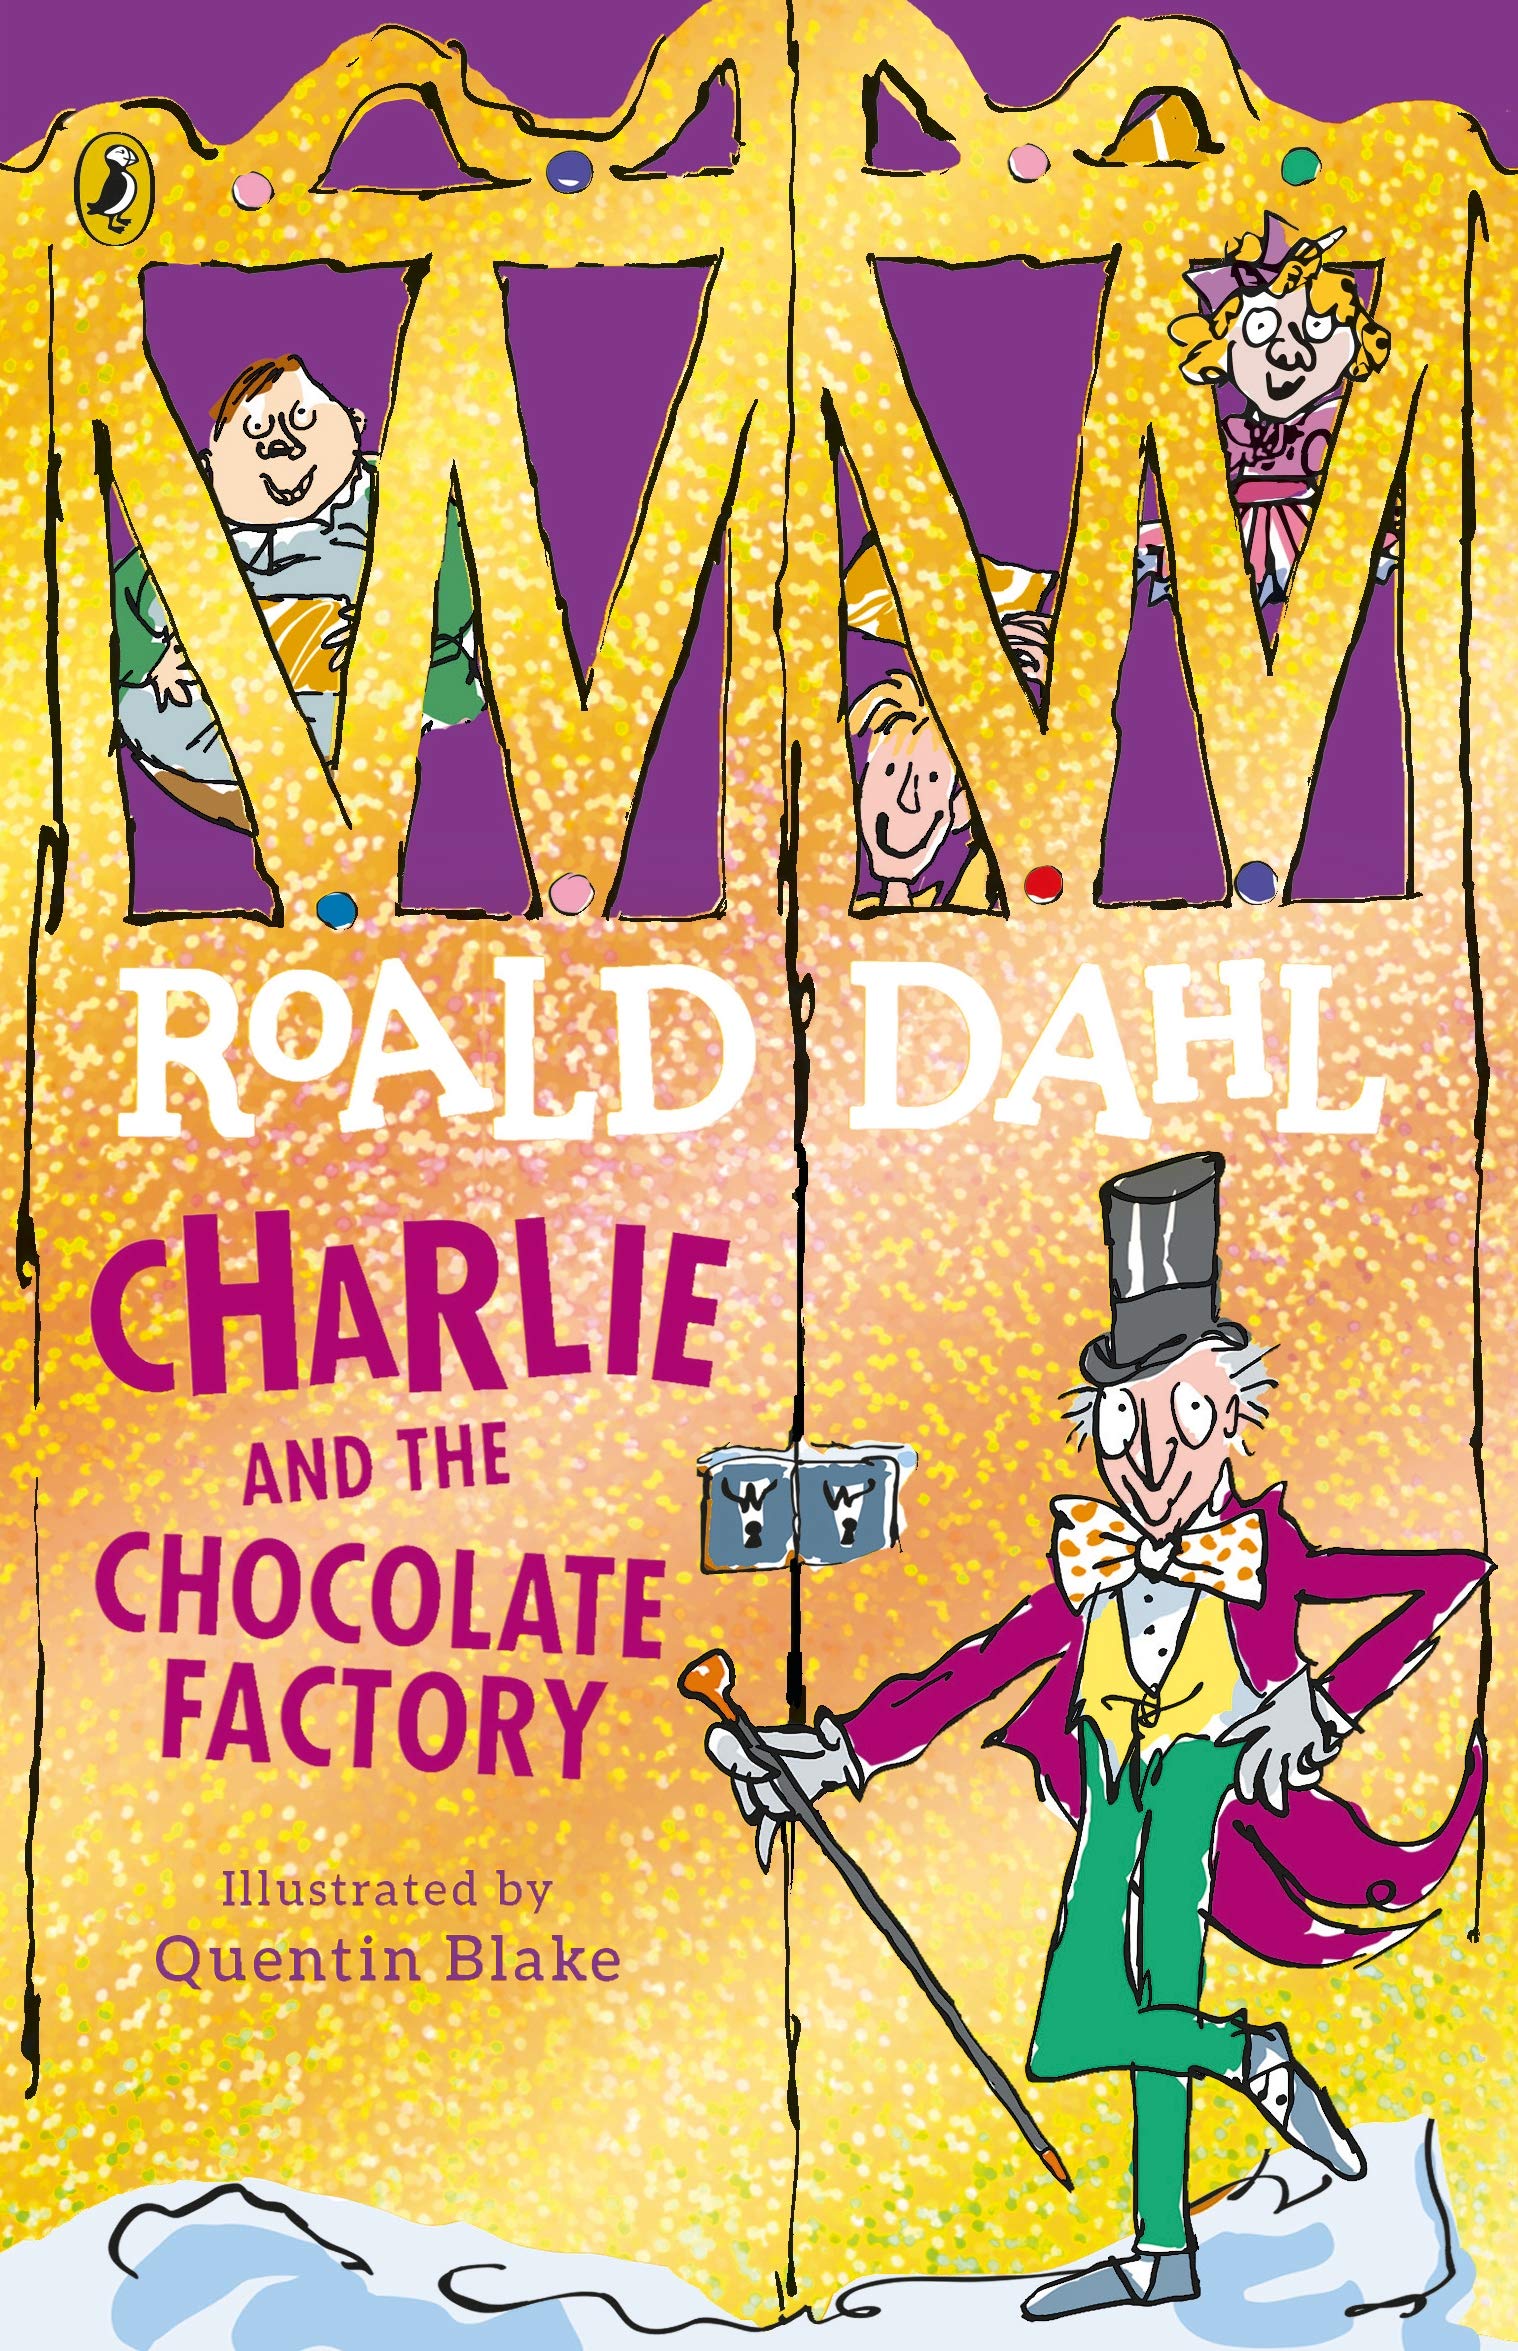  Charlie and the Chocolate Factory. Roald Dahl